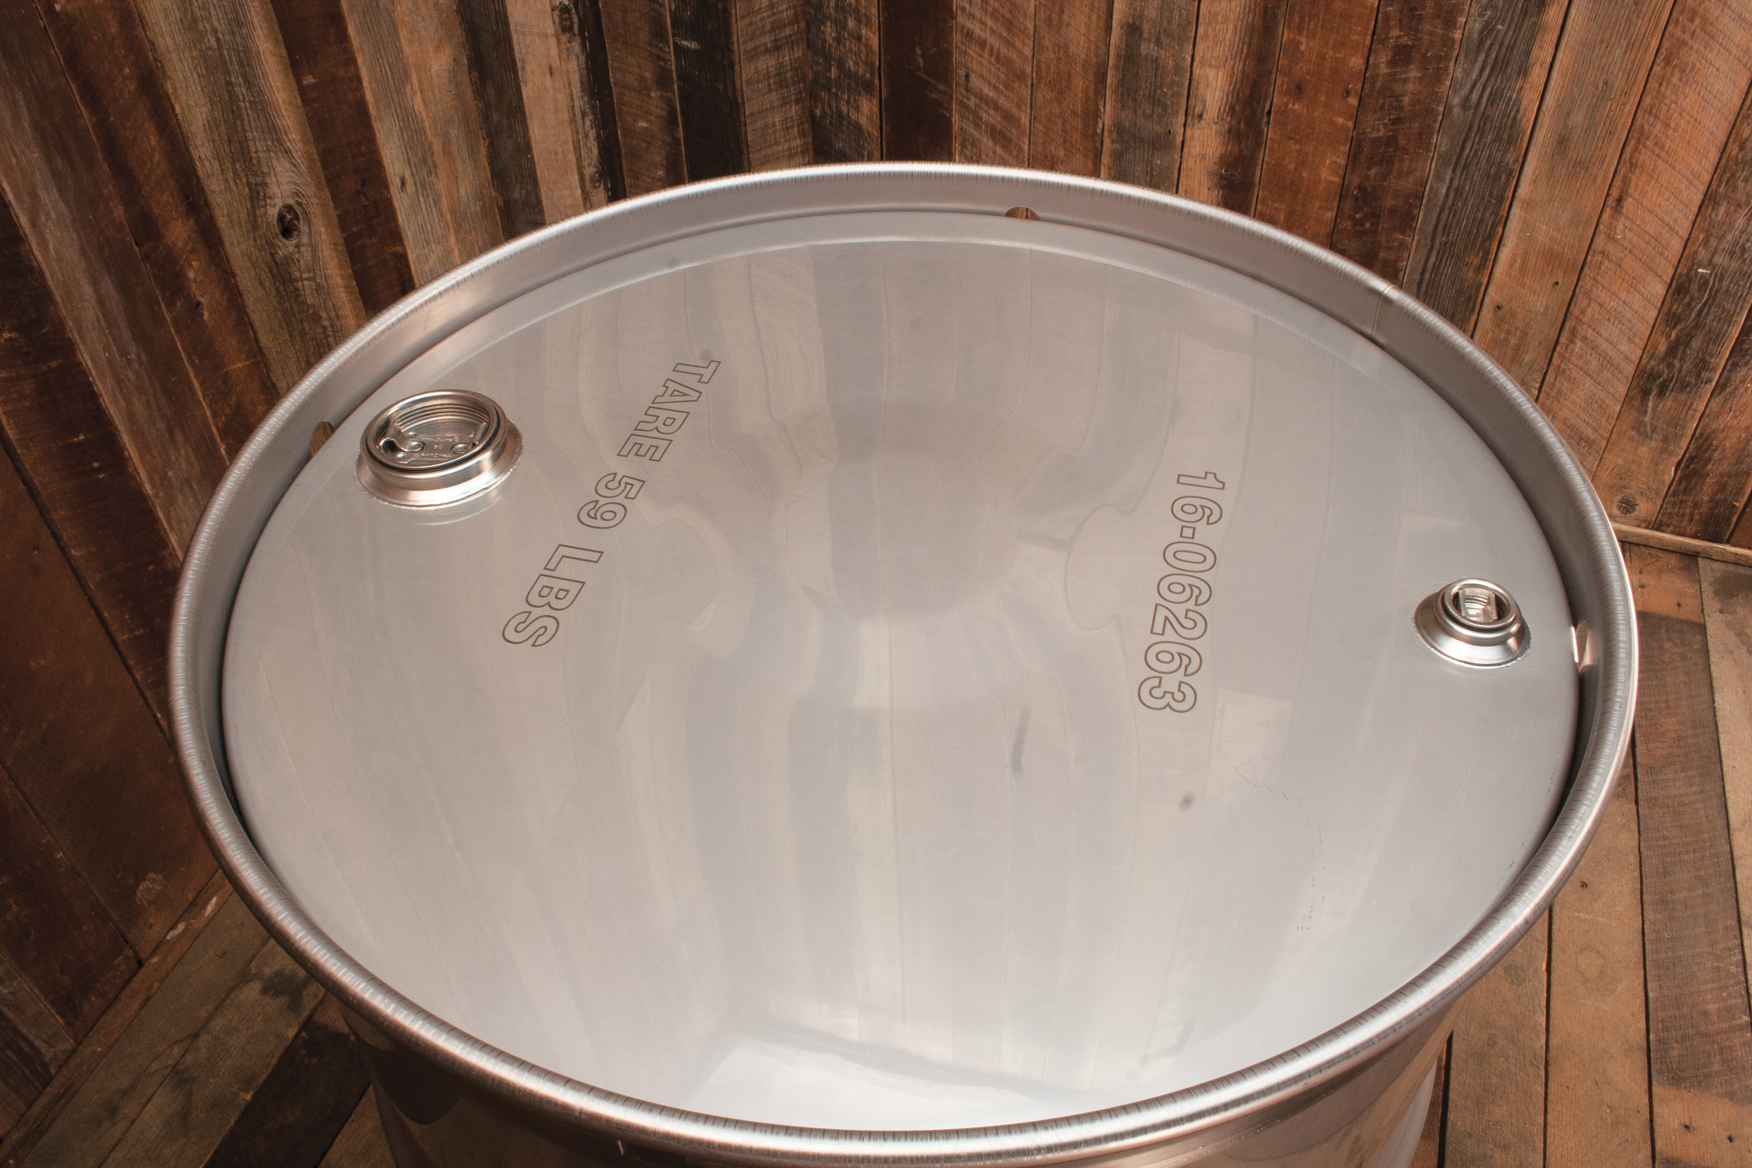 55 Gallon Tight Head Stainless Steel Drum, UN Rated, 2 & 3/4 Fittings (18  gauge)